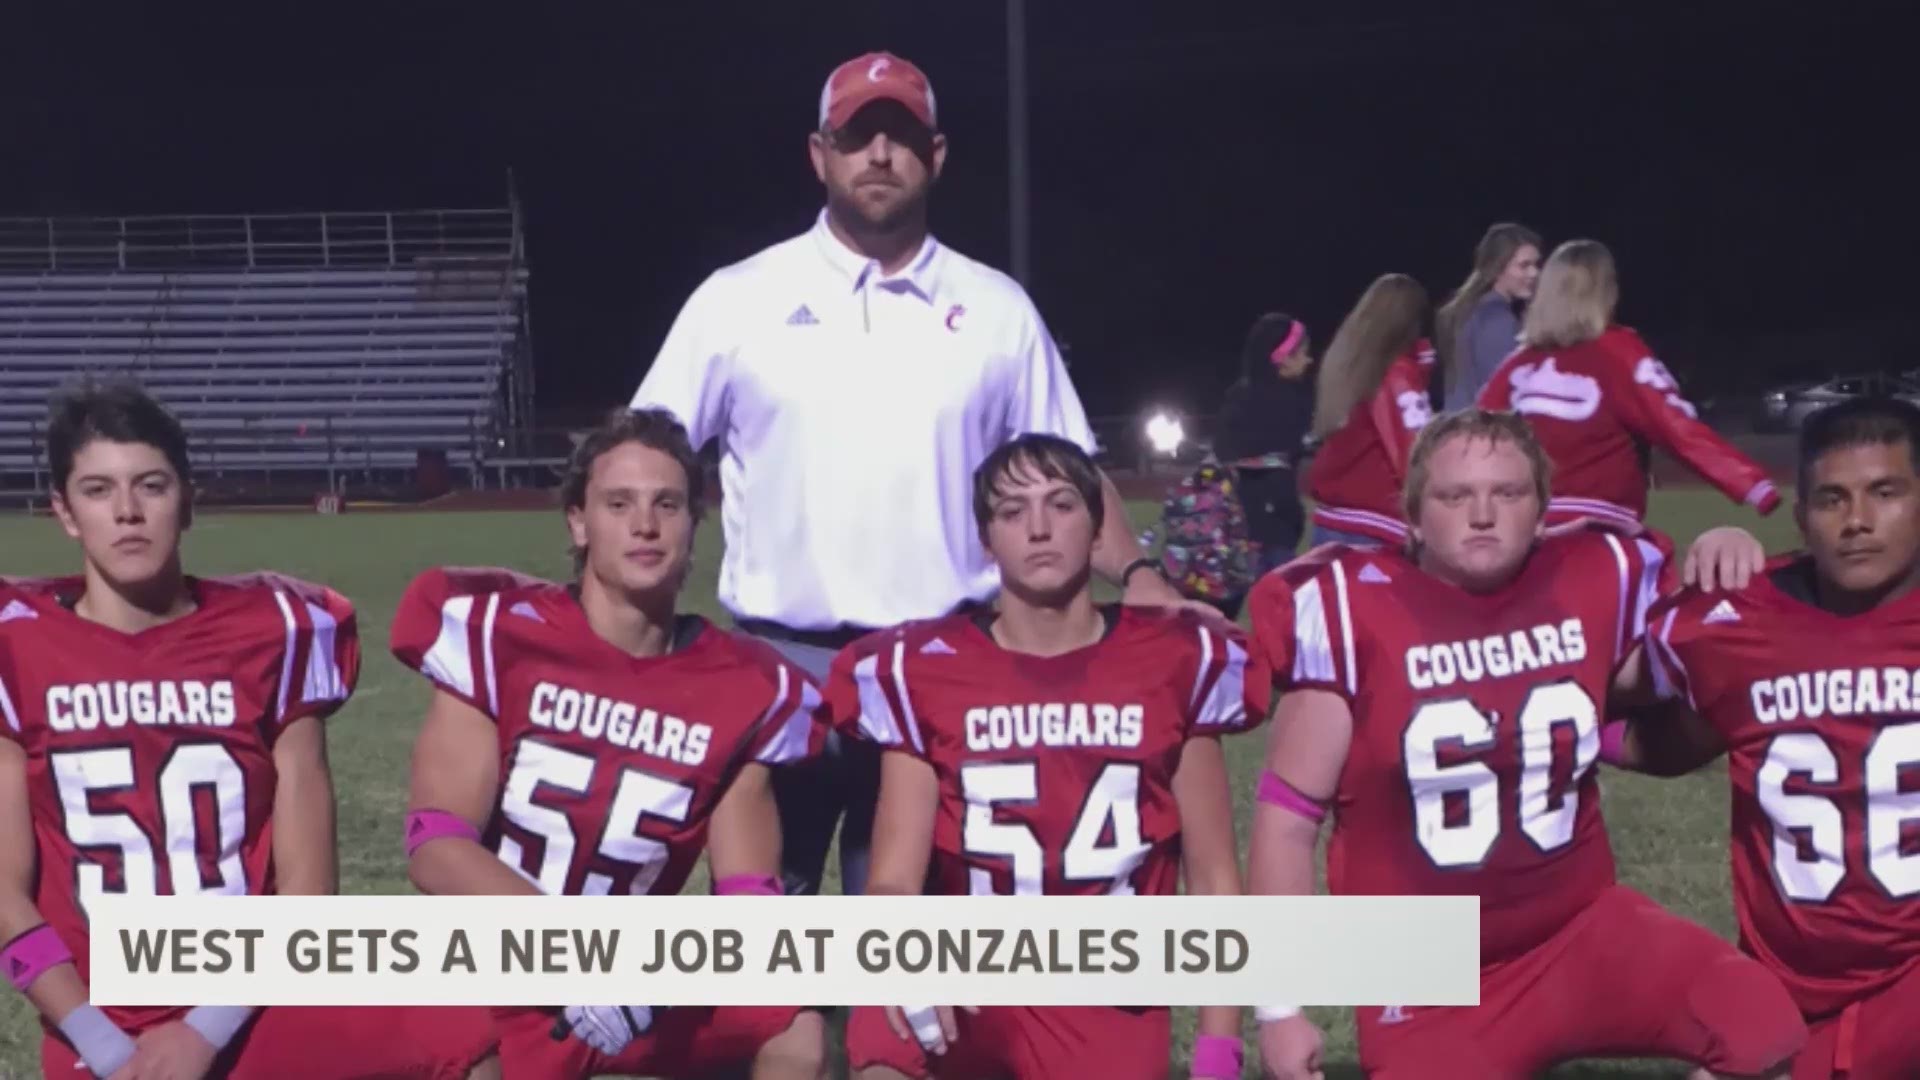 West will now coach football and track at Gonzales ISD